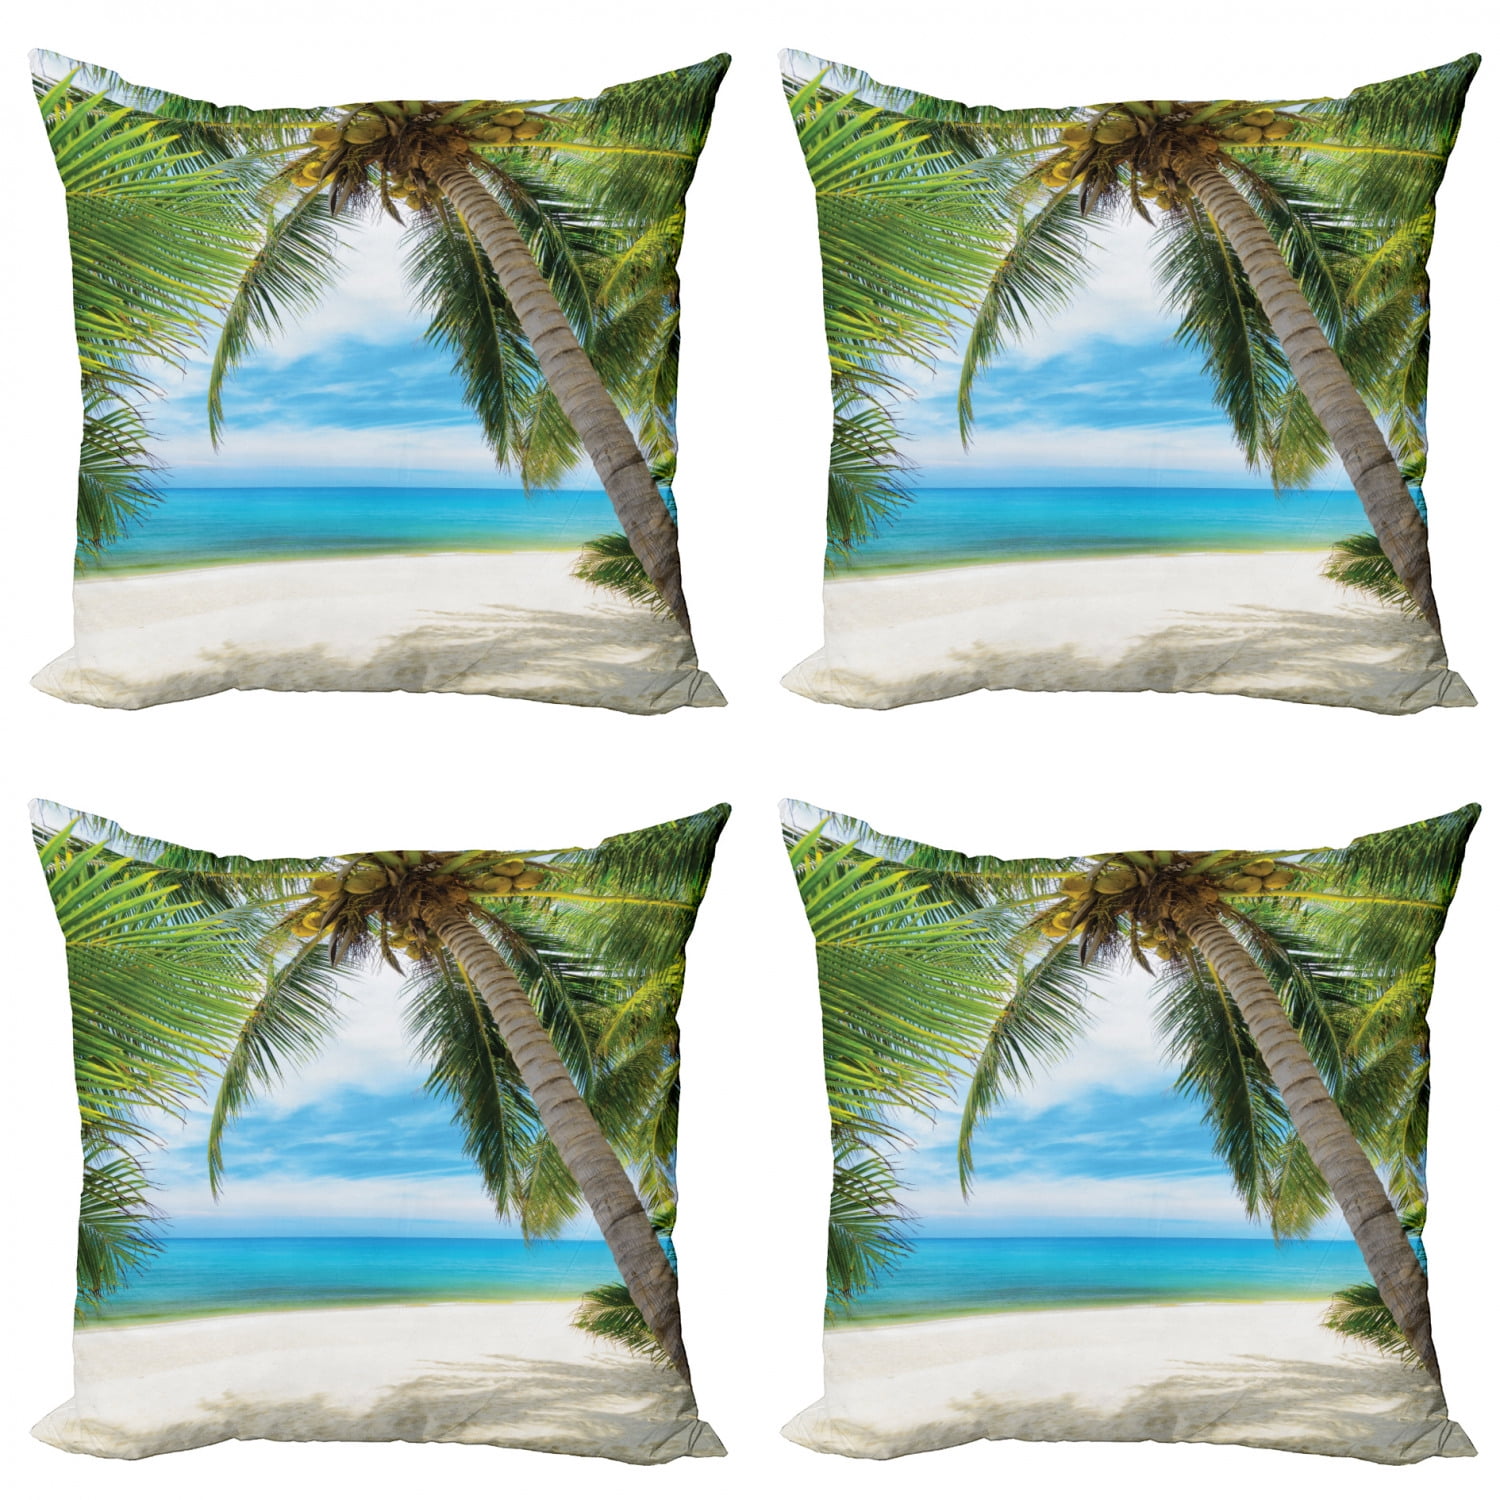 16x16 inches Throw Pillow Case Decor Cushion Covers Square with Hidden Zipper Closure Twin-sided Print Sandy Tropical Paradise Beach with Palm Trees and the Sea Ocean Cushion Case 